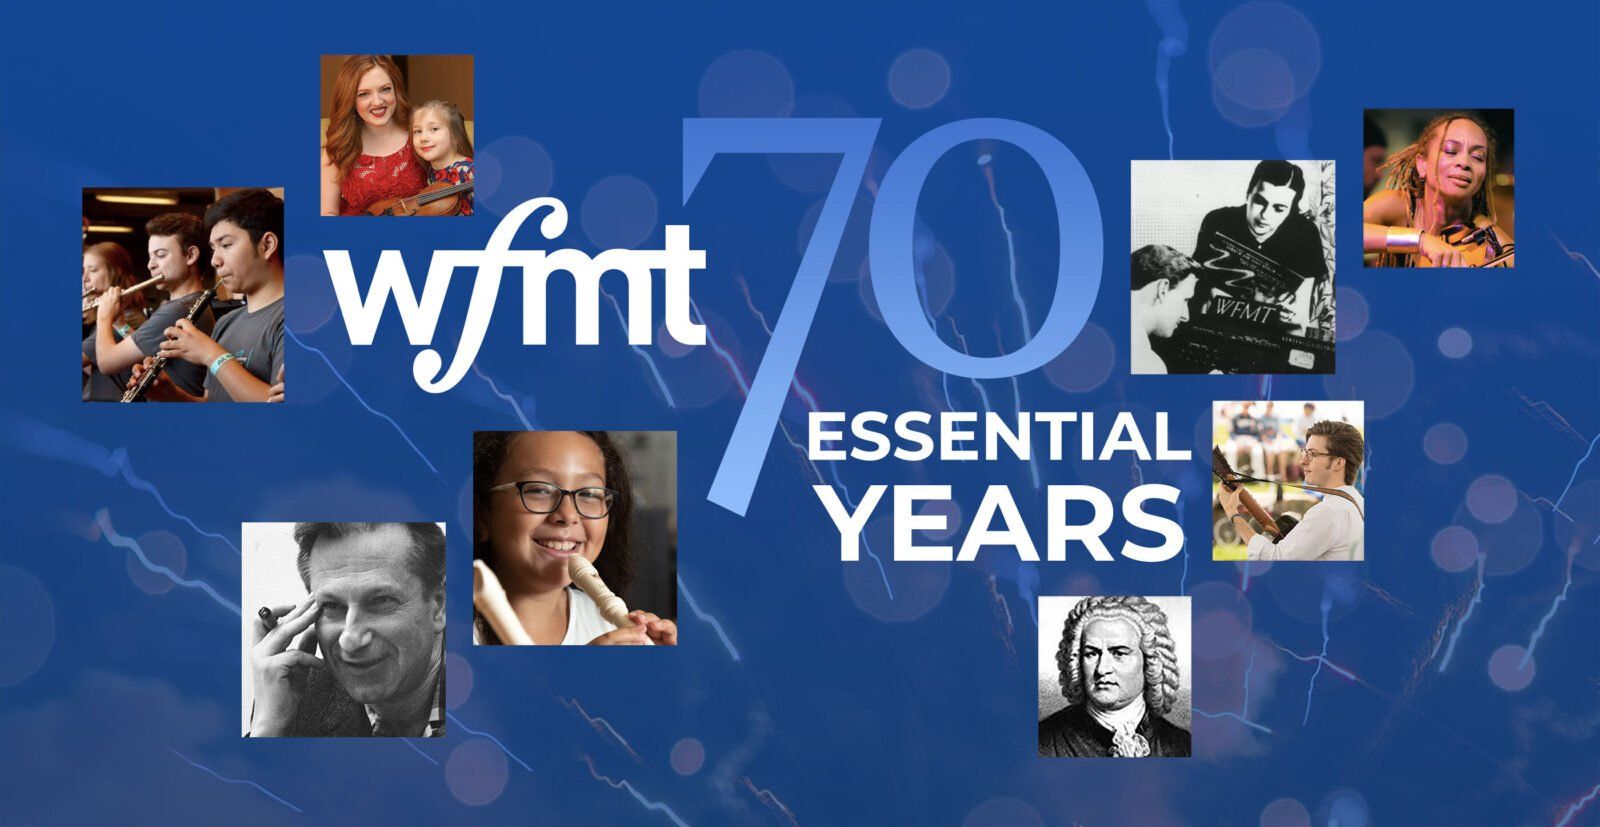 WFMT Celebrates 70 Years On Air Monday with a Full Day of Live